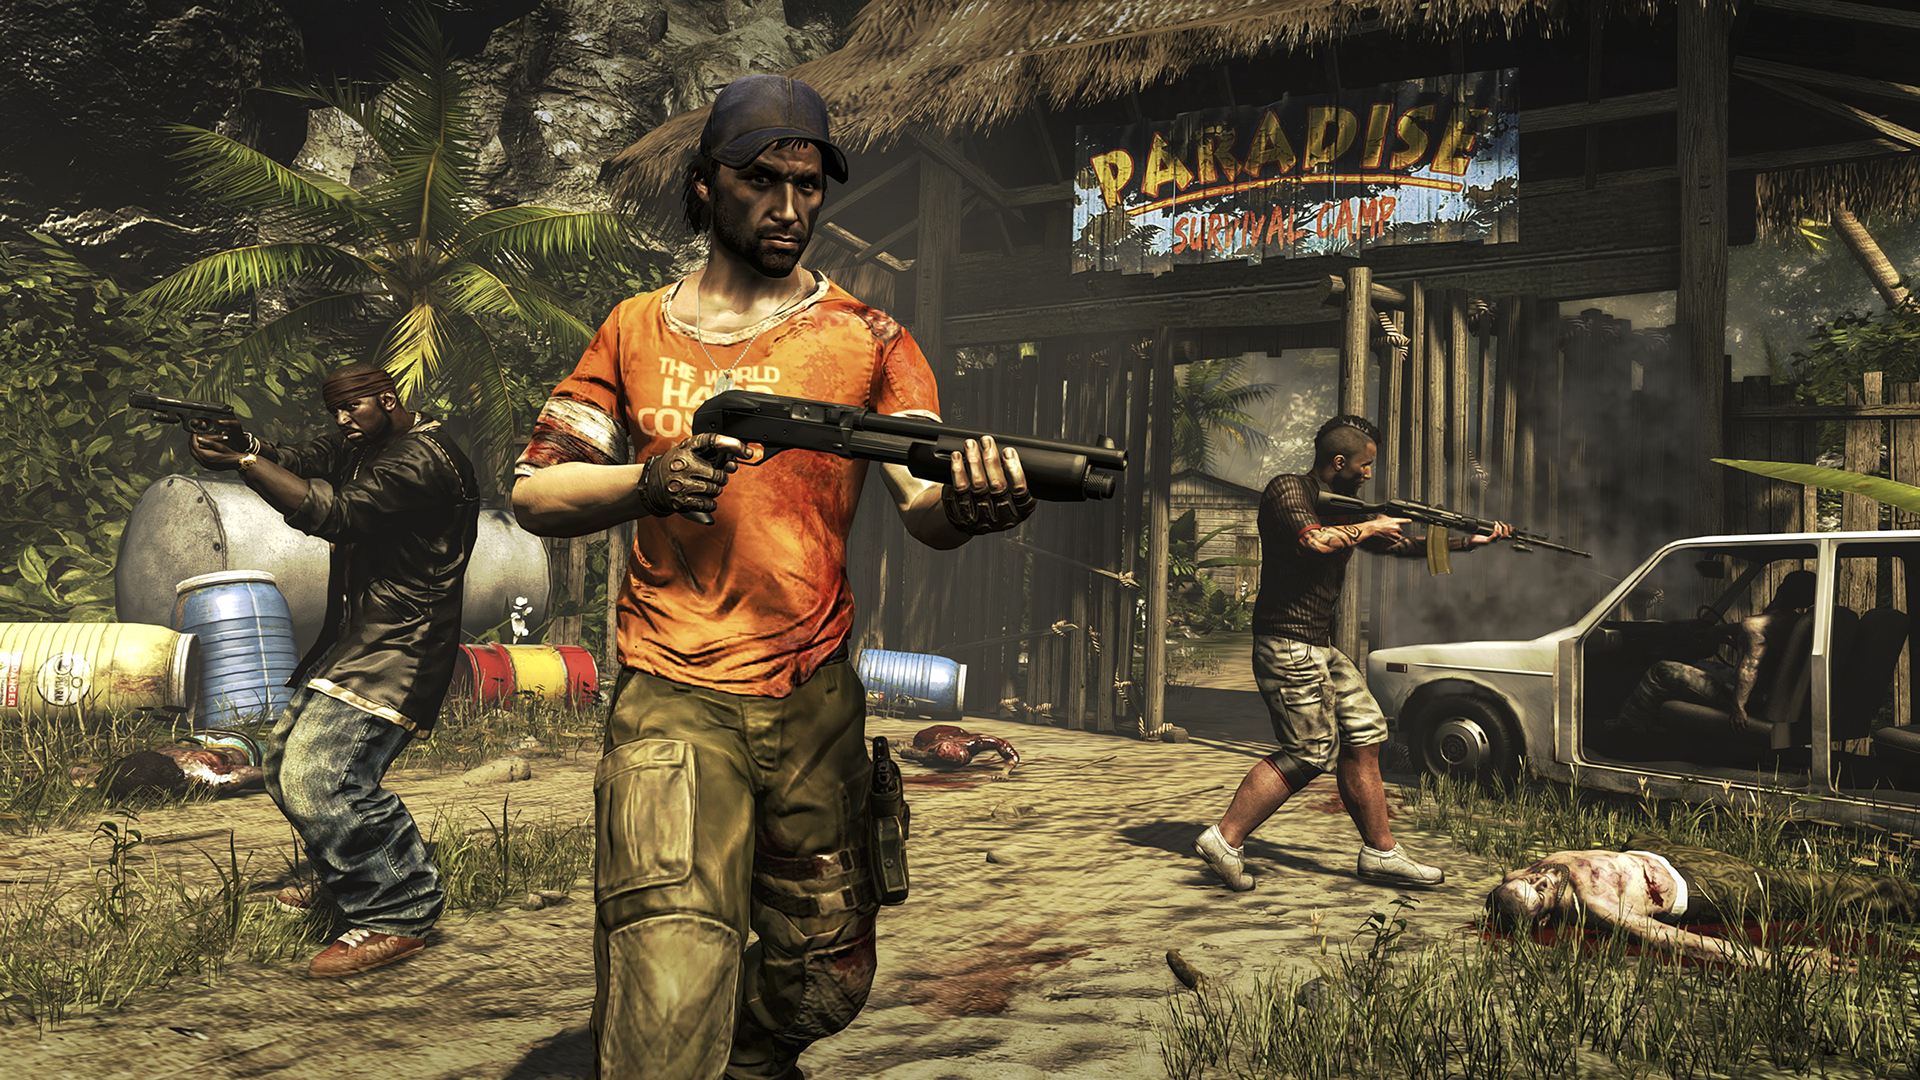 This Dead Island Riptide Wallpaper Is Available In Sizes